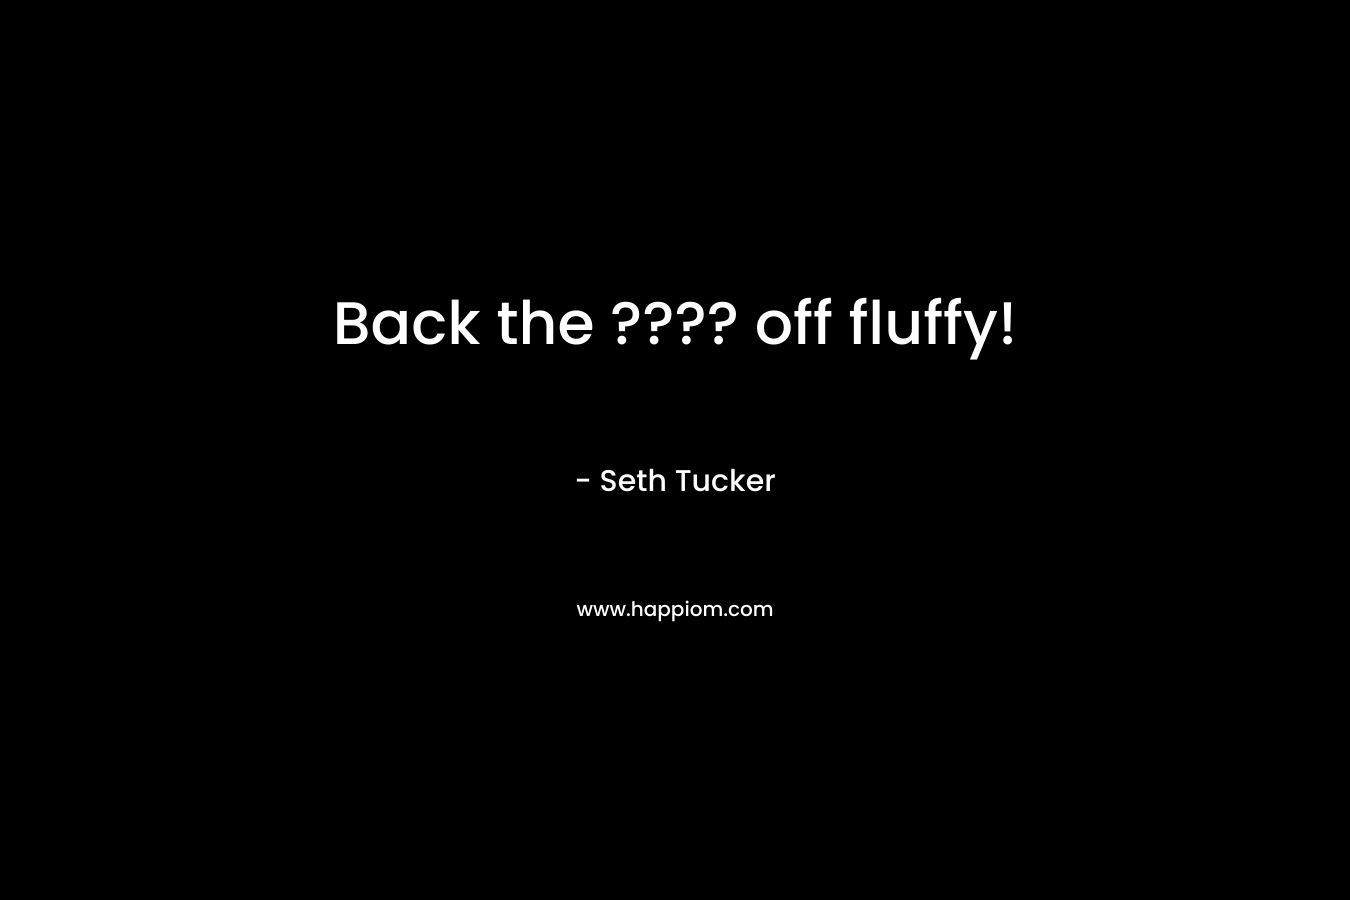 Back the ???? off fluffy!